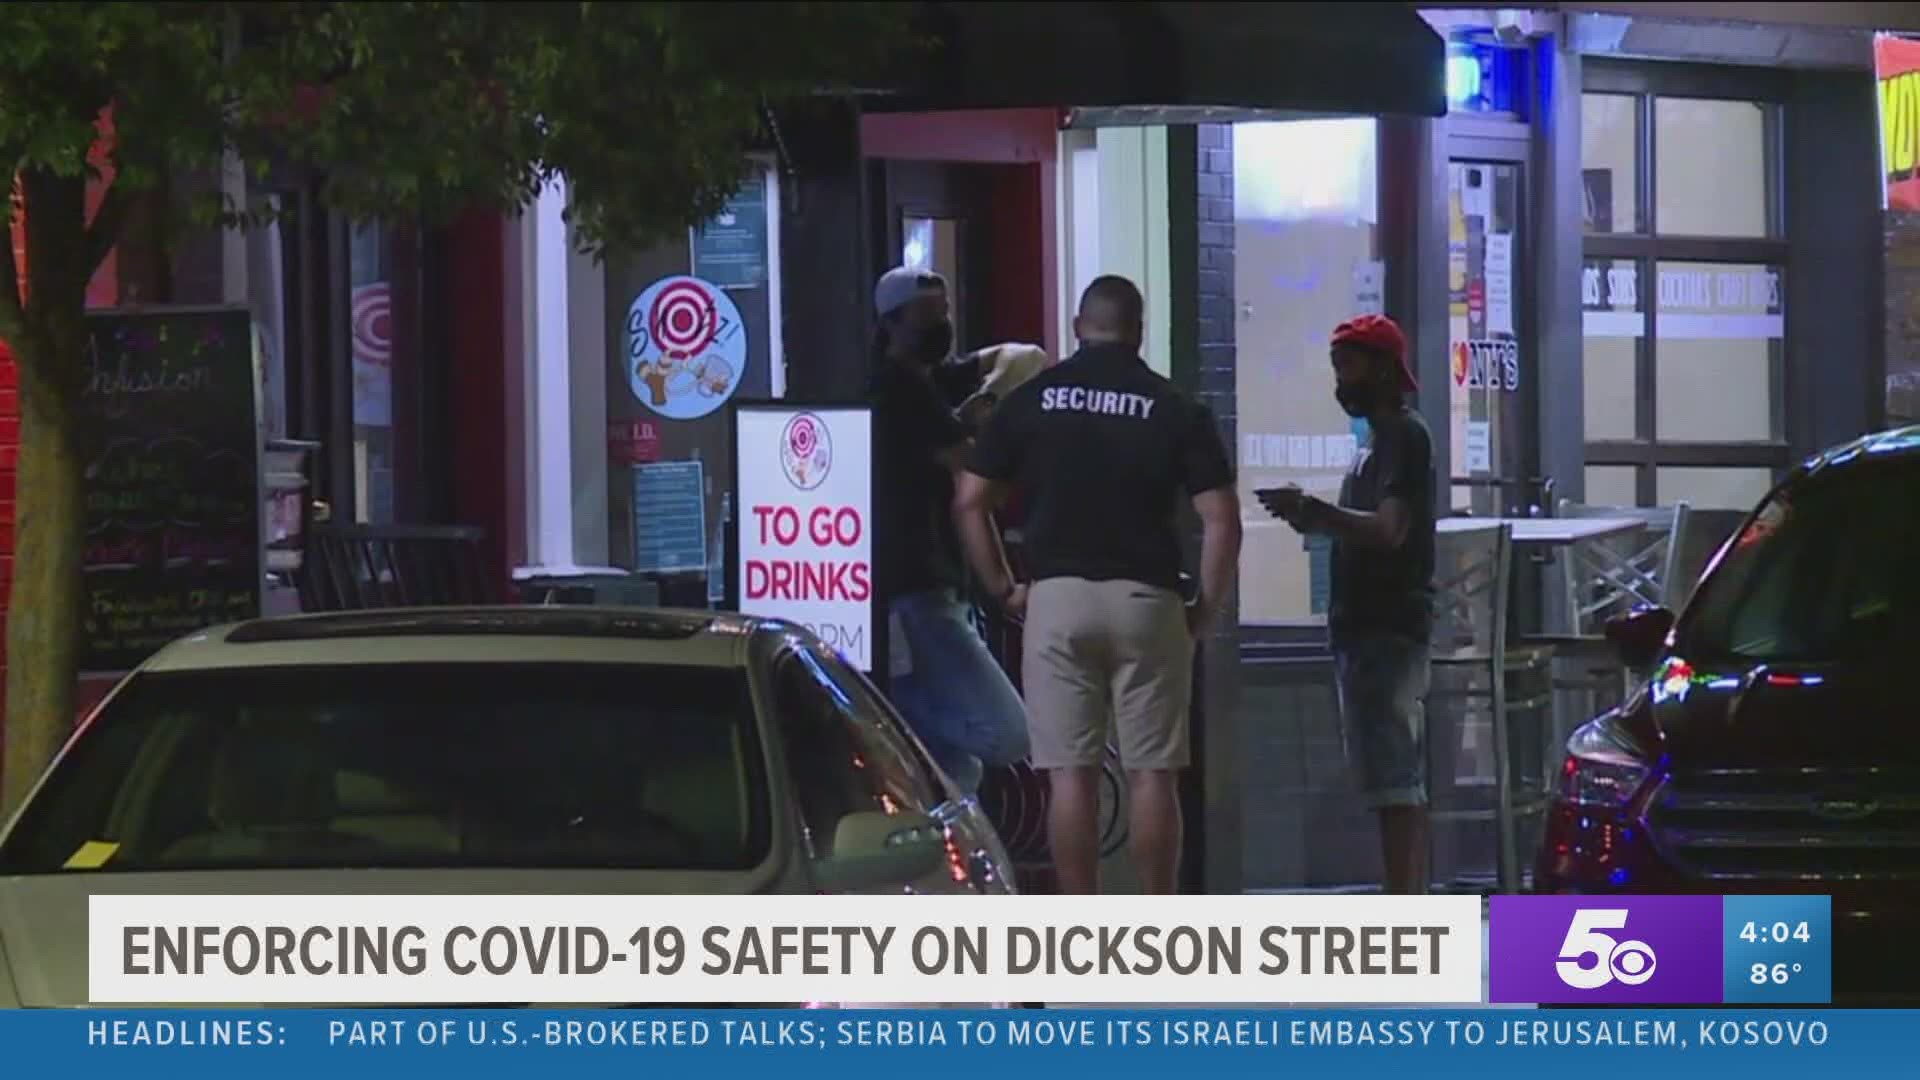 Enforcing COVID-19 safety on Dickson St.